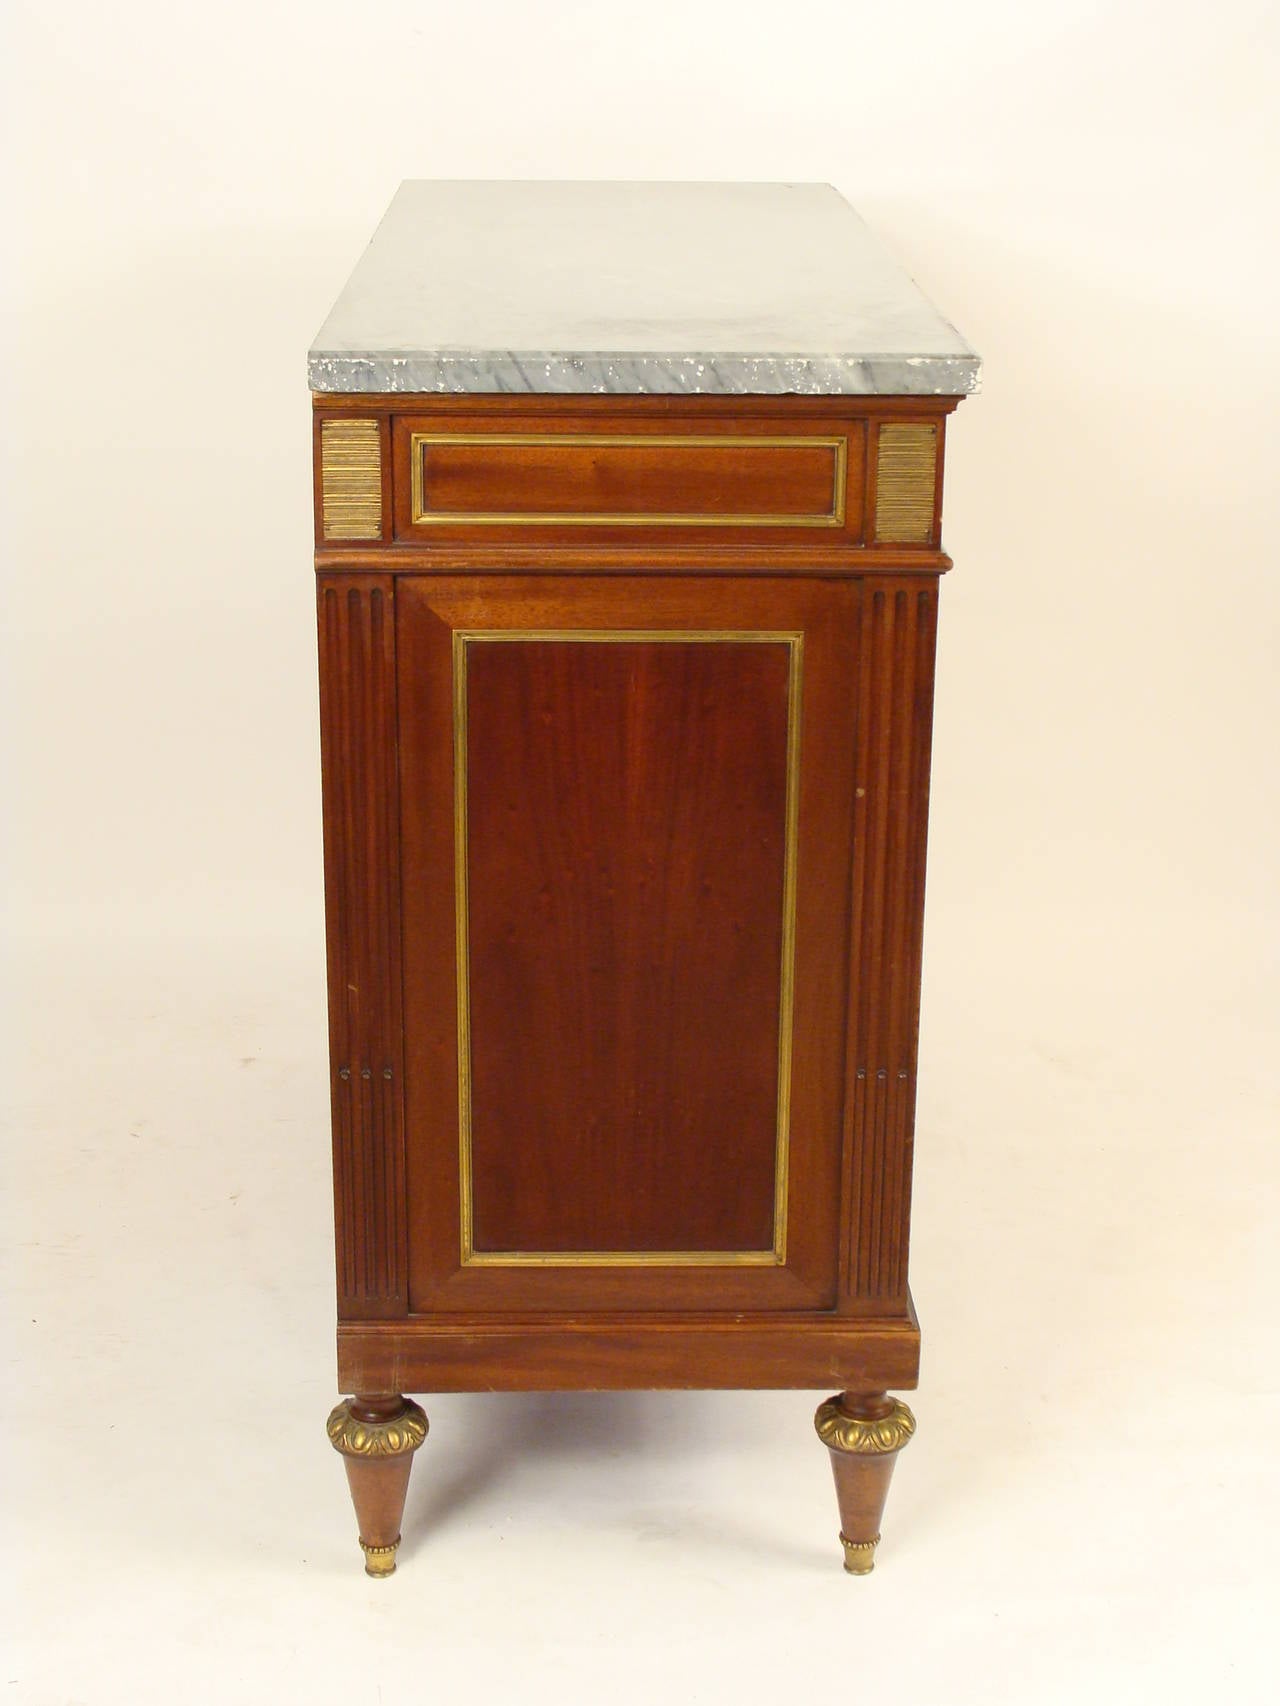 Maison Jansen style Louis XVI mahogany buffet with gilt bronze trim and a marble top, mid-20th century. This cabinet exhibits exceptional workmanship and materials throughout.